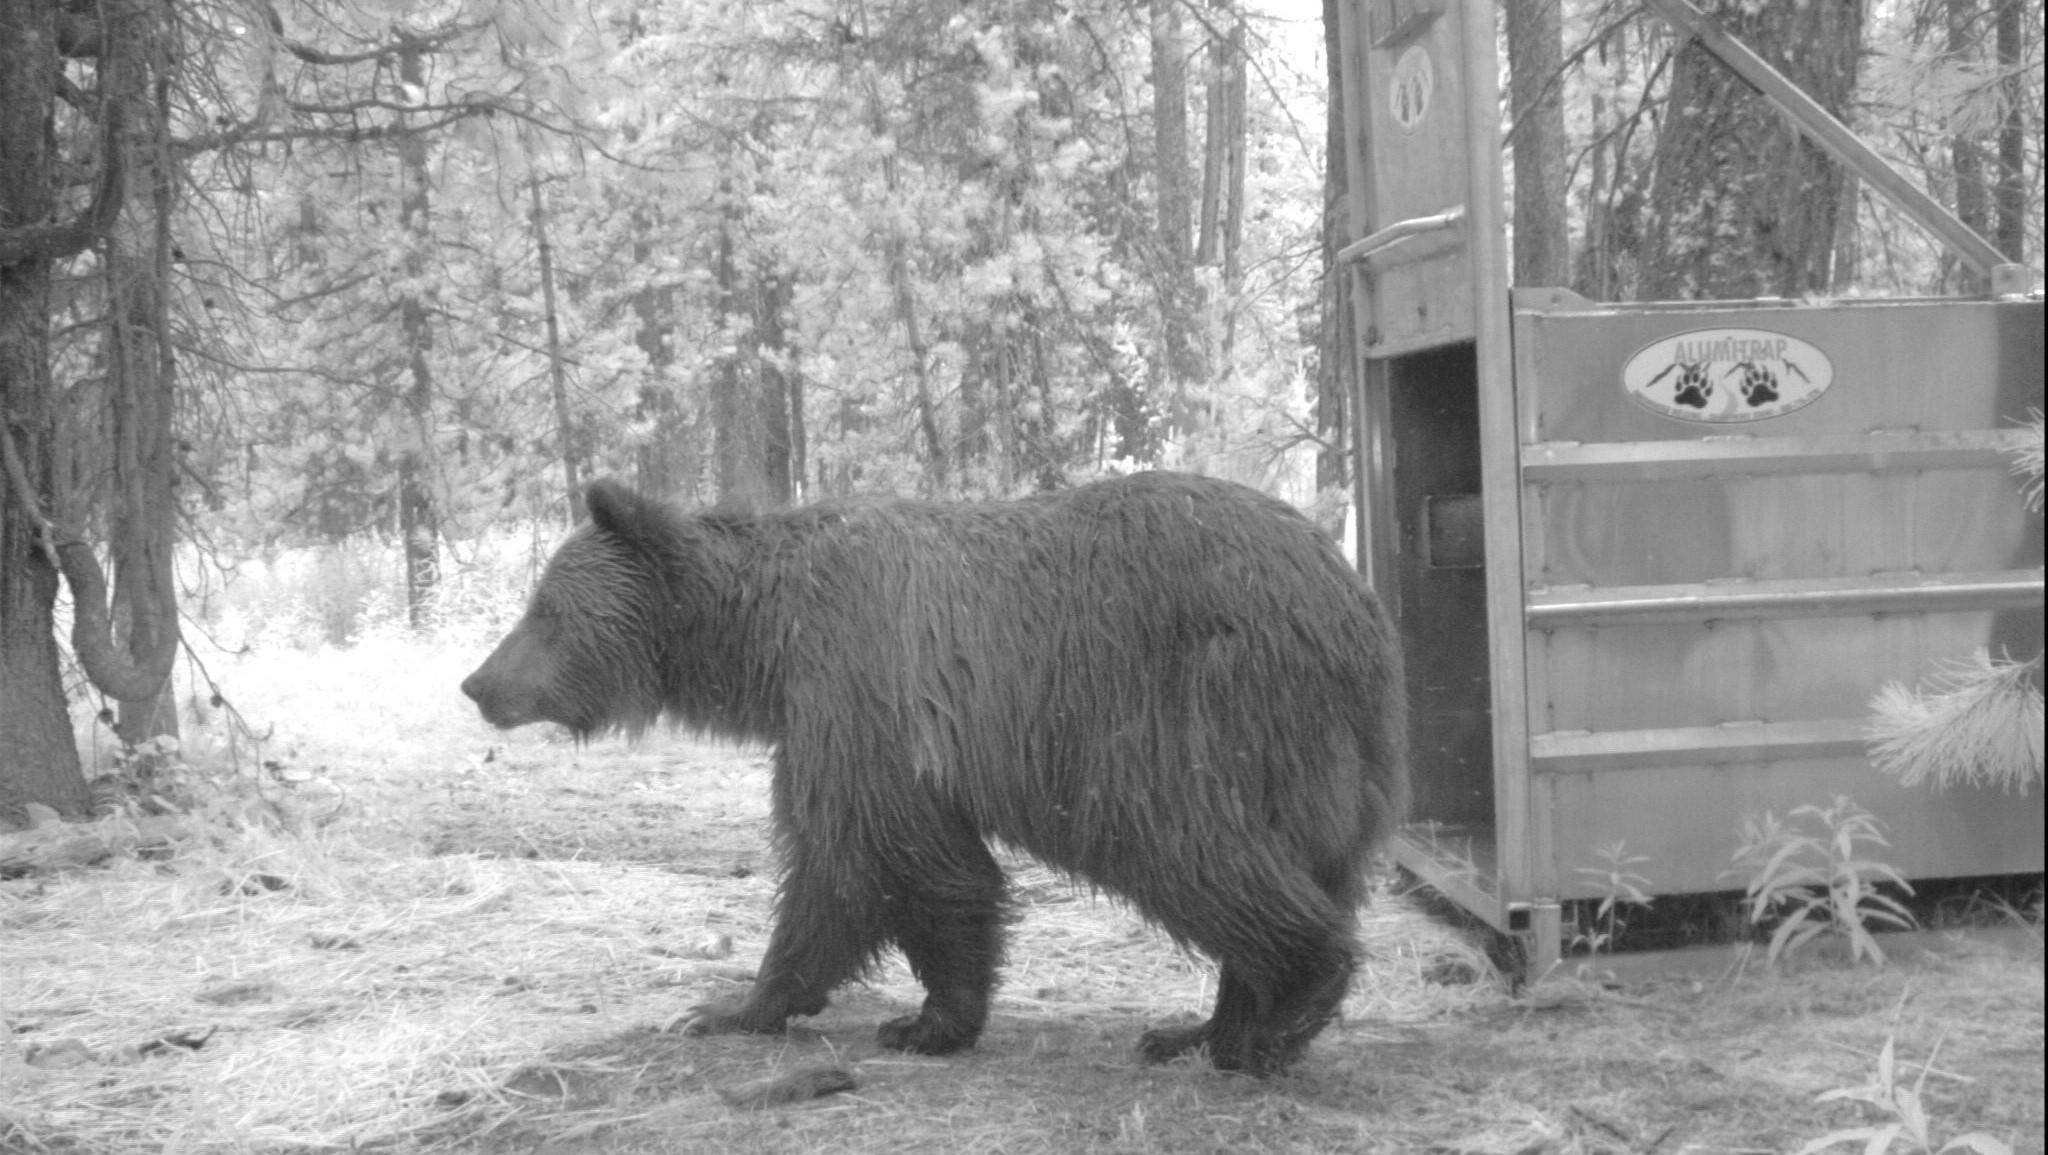 black and white photo of a grizzly bear near a trap